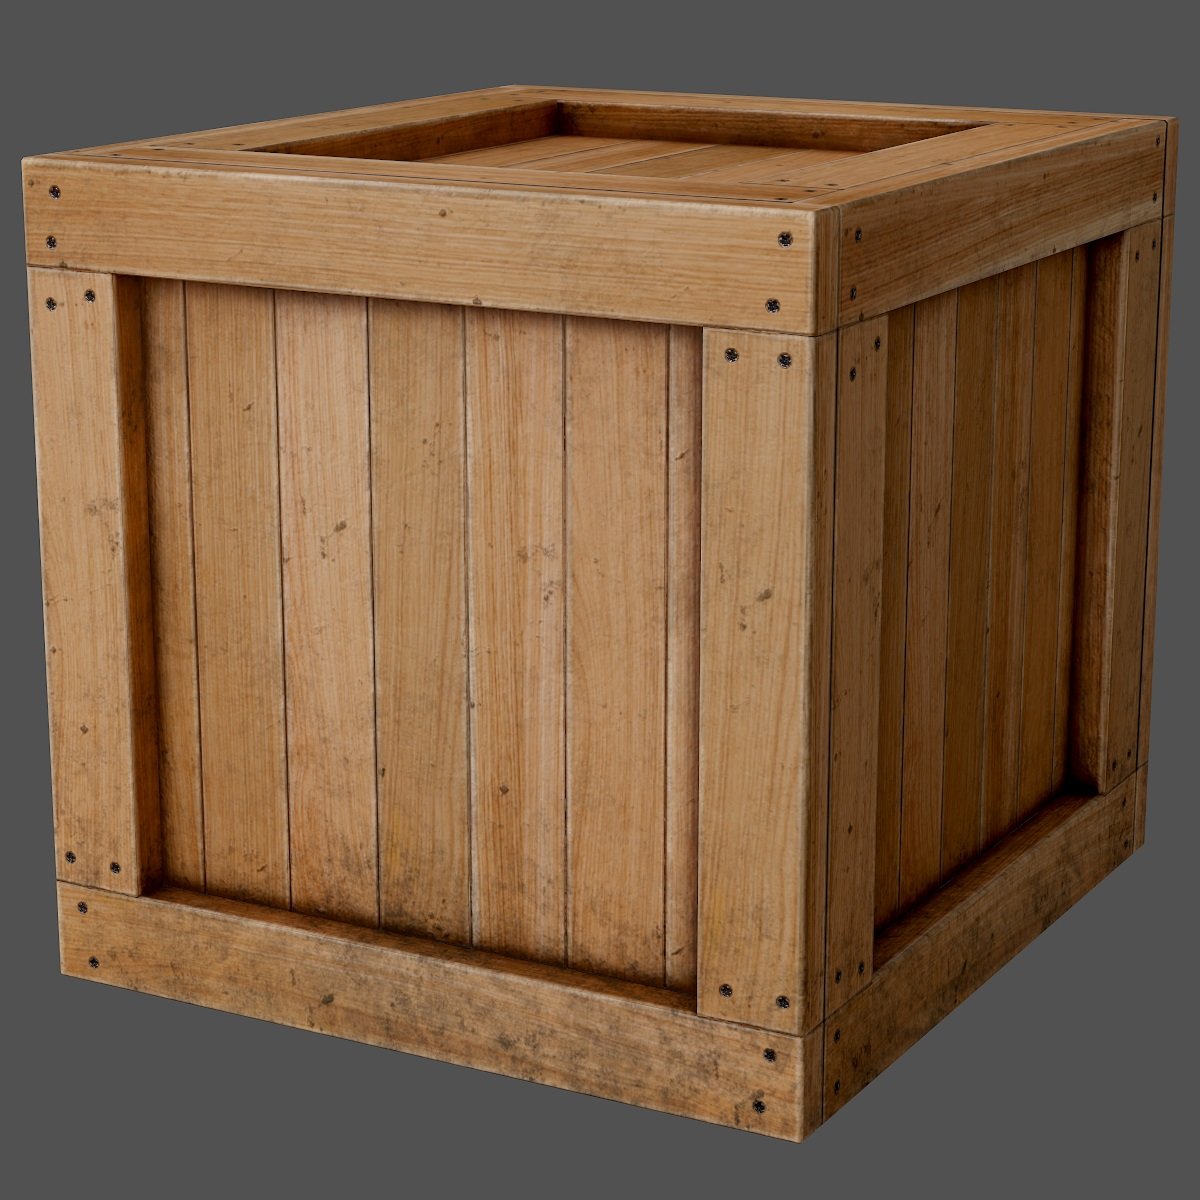 Wooden Box Png